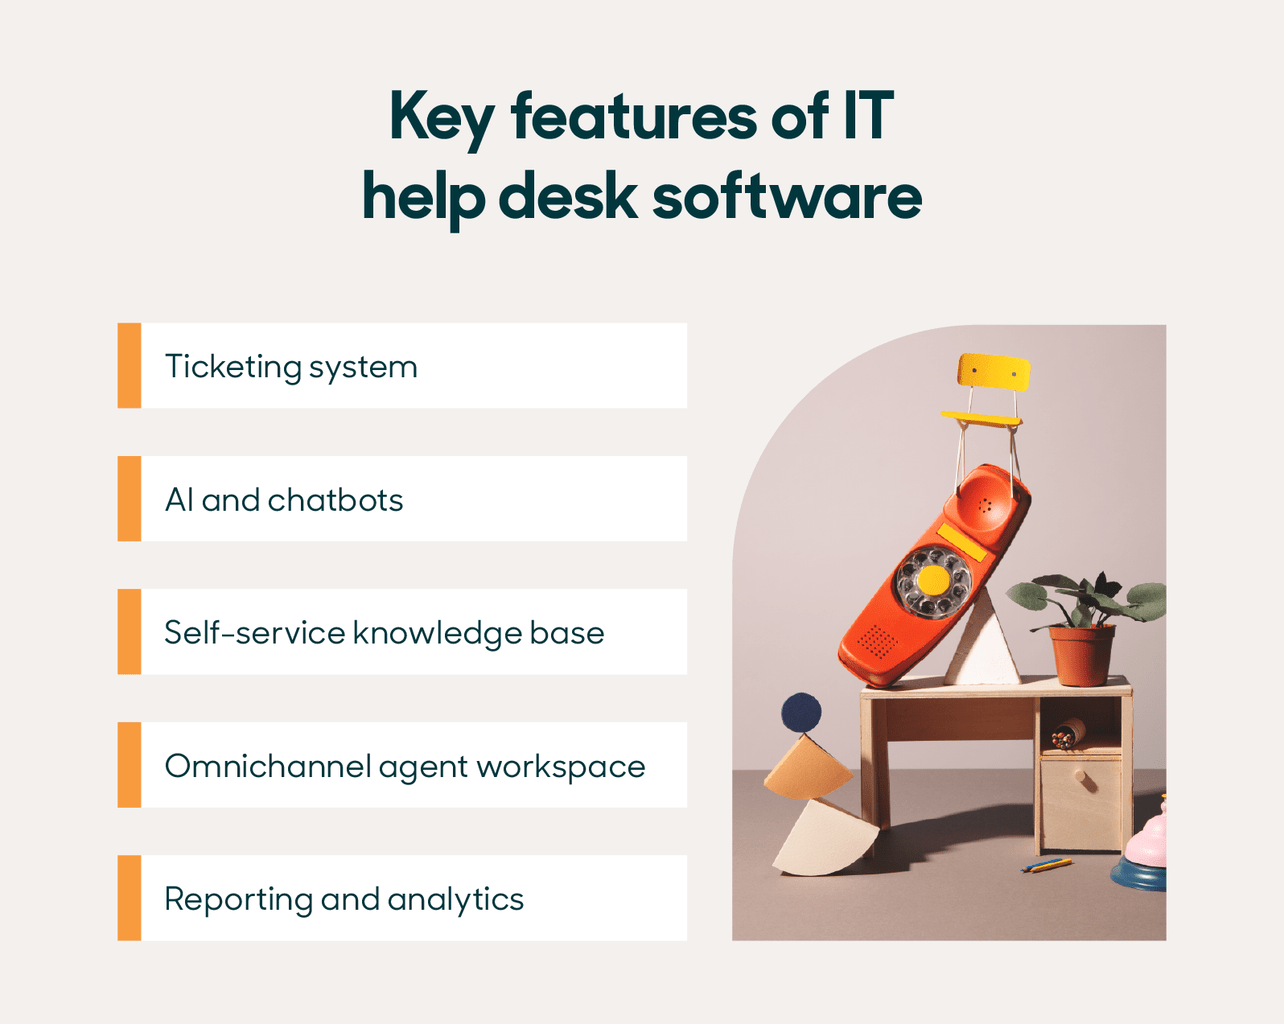 Key features of IT help desk software